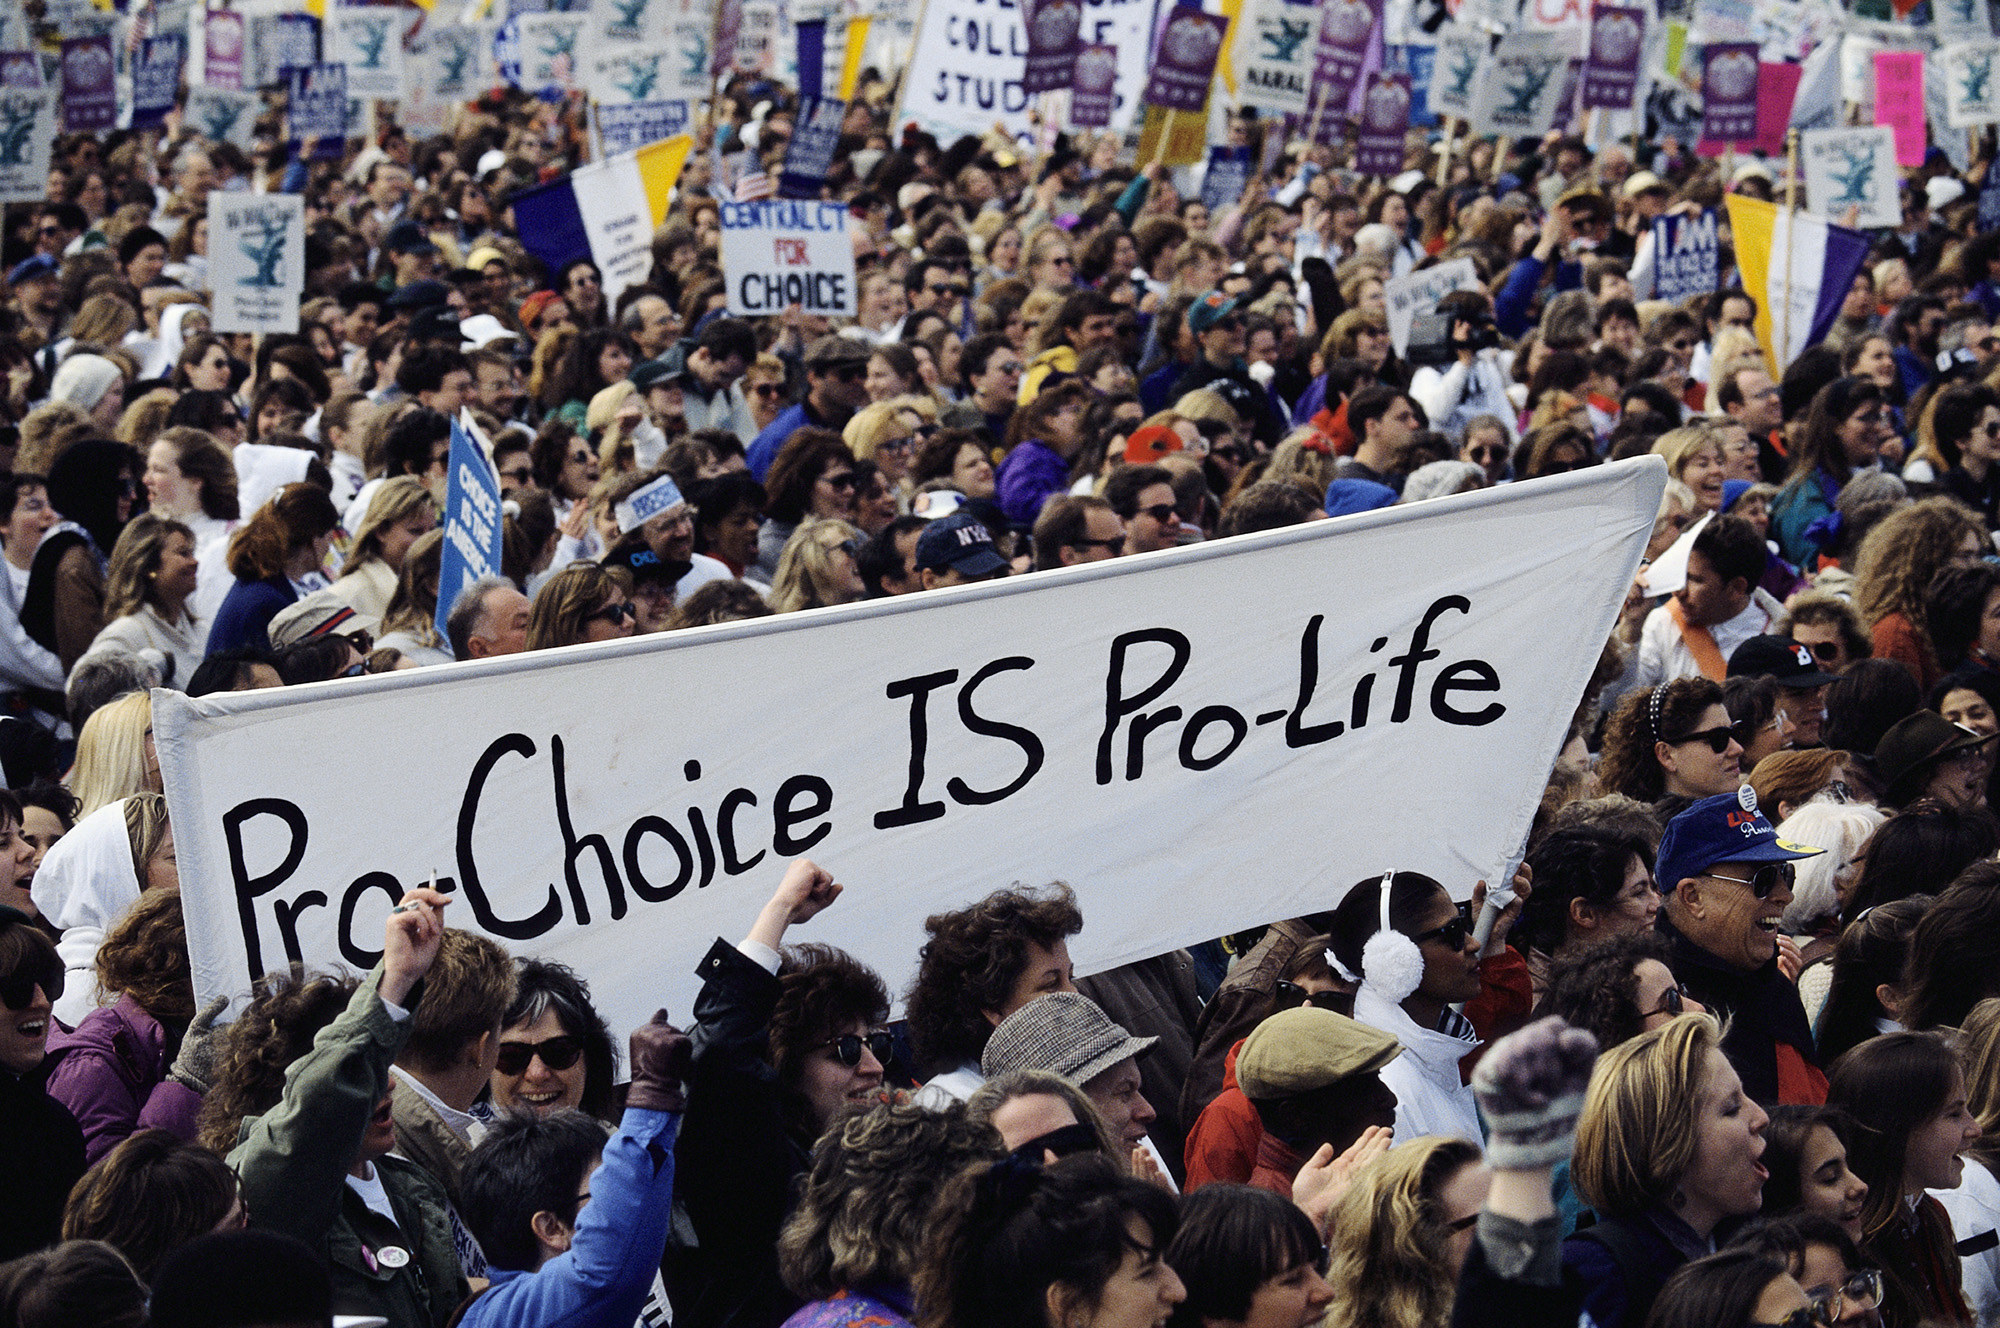 A banner held by demonstrators in a large crowd reads &quot;pro-choice is pro-life&quot;